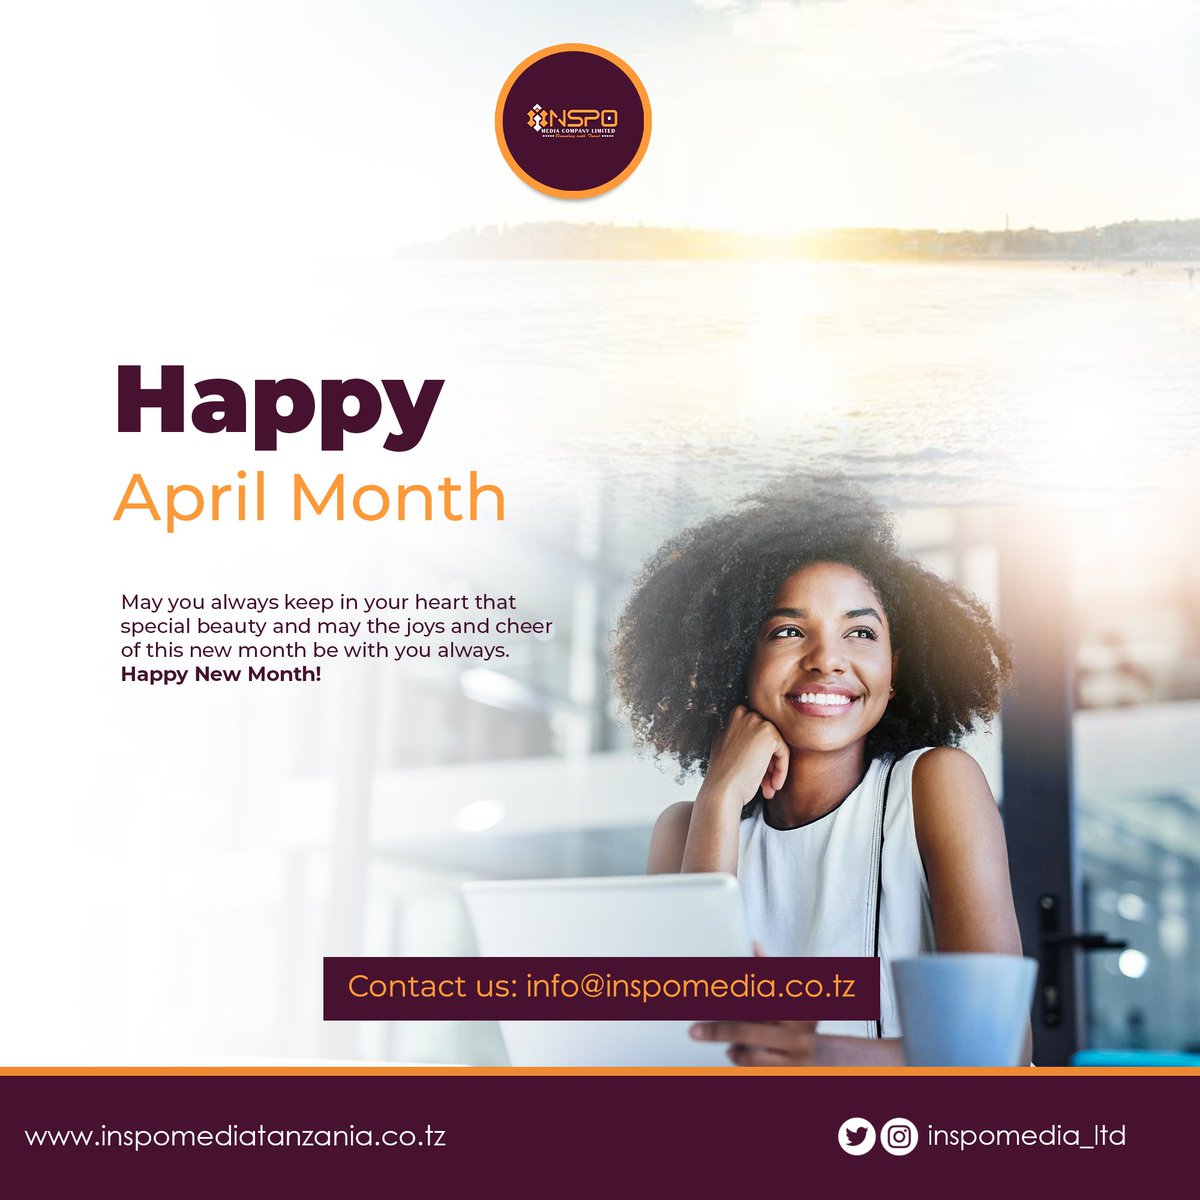 May you always keep in your heart that Special beauty and may the joys and cheer of this new month be with you always. 
Happy New Month!!

#mediaplanning #digitalmarketing #adevertisingagency